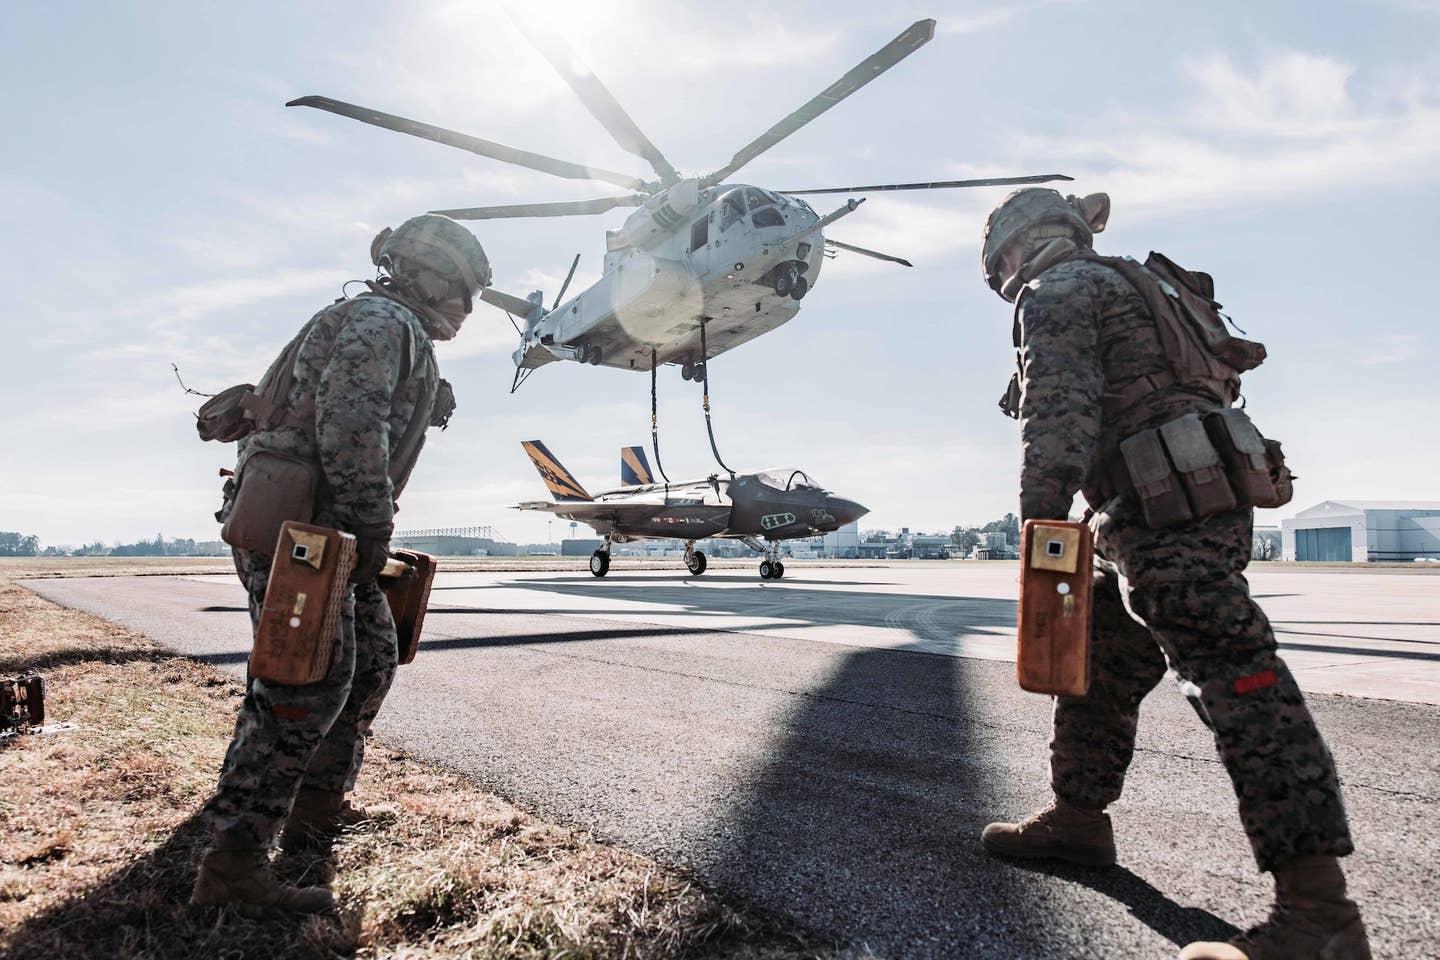 U.S. Marines with Combat Logistics Battalion (CLB) 24, Combat Logistics Regiment 2, 2nd Marine Logistics Group, wait for an F-35C Lightning II lift to land during Helicopter Support Team operations at Naval Air Station Patuxent River, Md., Dec. 13, 2022. <em>U.S. Marine Corps photo by Cpl. Meshaq Hylton</em>